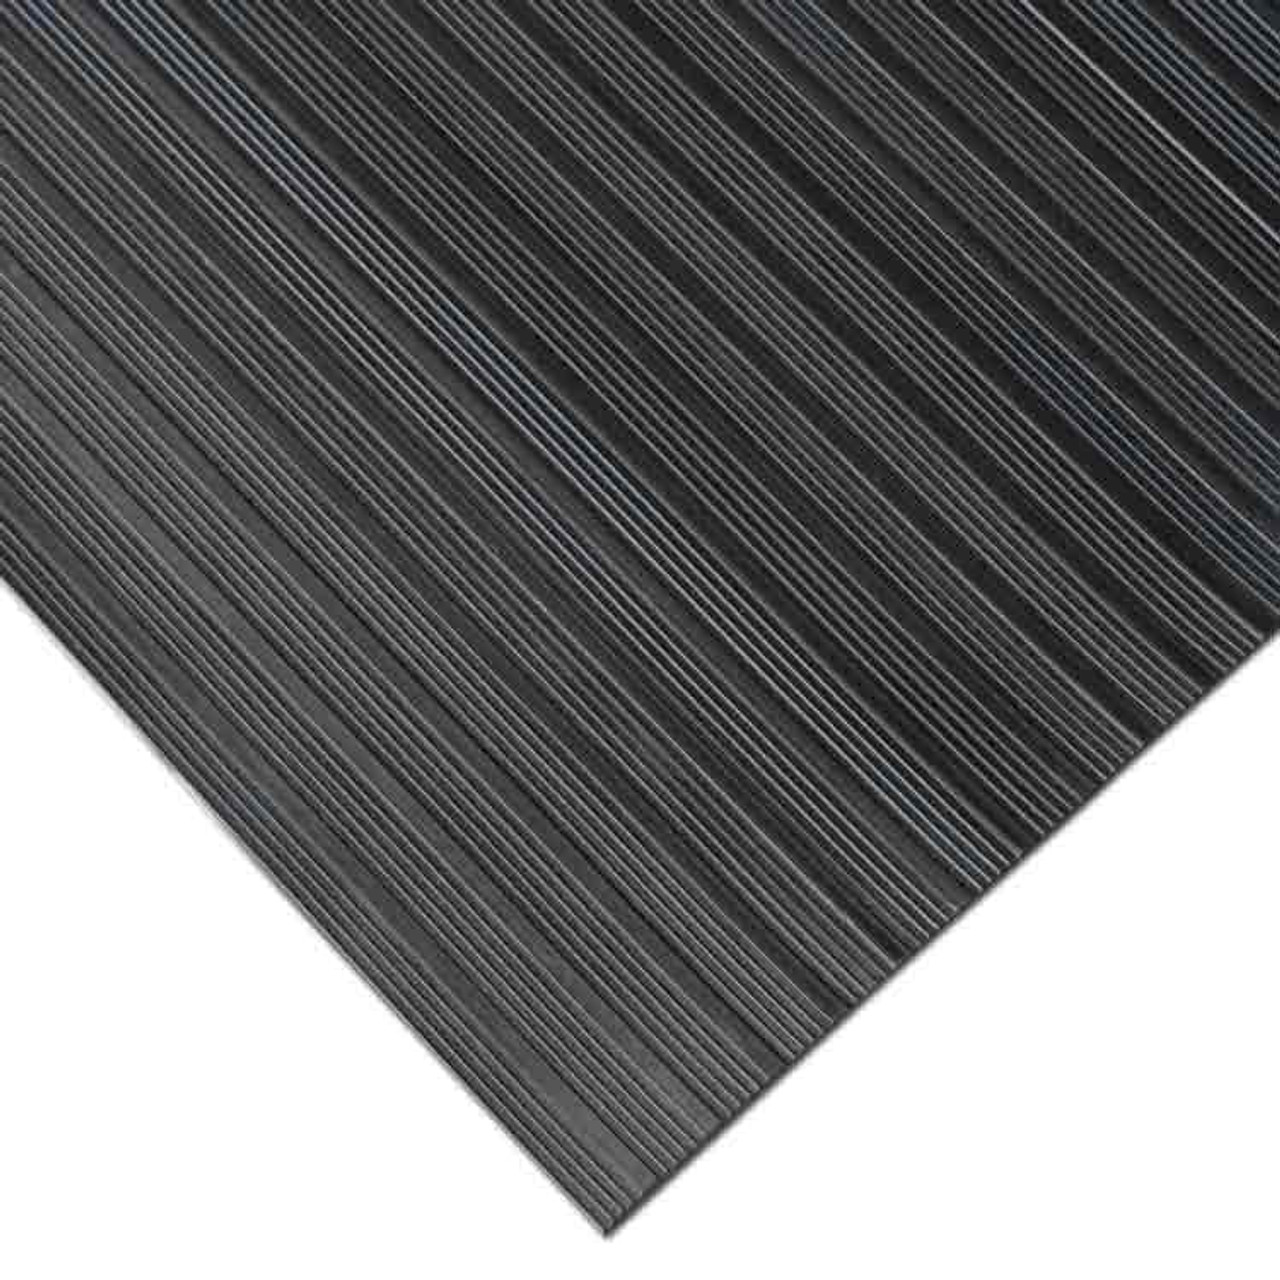 Tuff-Trac Corrugated Rubber Runner Mat - 1/8 x 48 x 10' - Durable Rubber  Floor Mat, Corrugated Top, Anti-Slip Floor Covering, Rubber Mat for Homes